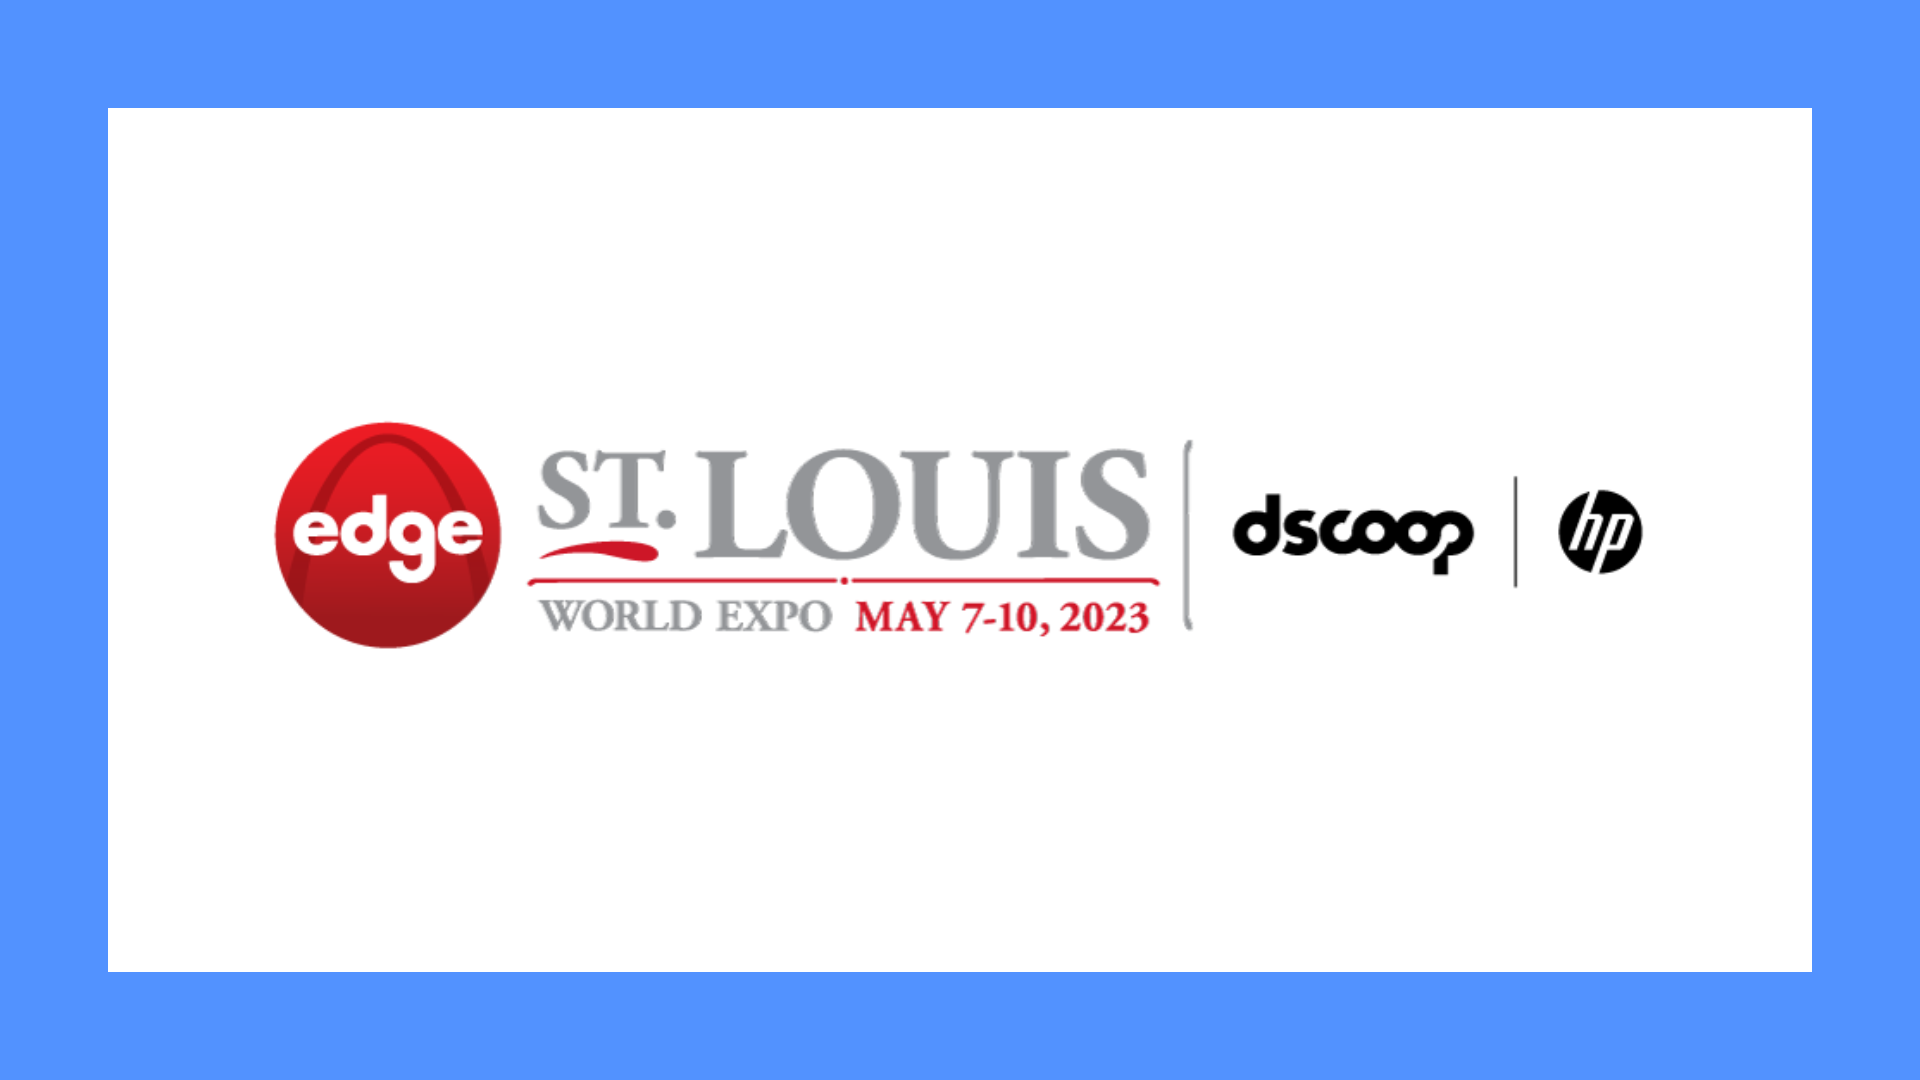 Duplo USA to Highlight B2 Finishing and Packaging Solutions at Dscoop Edge World Expo 2023